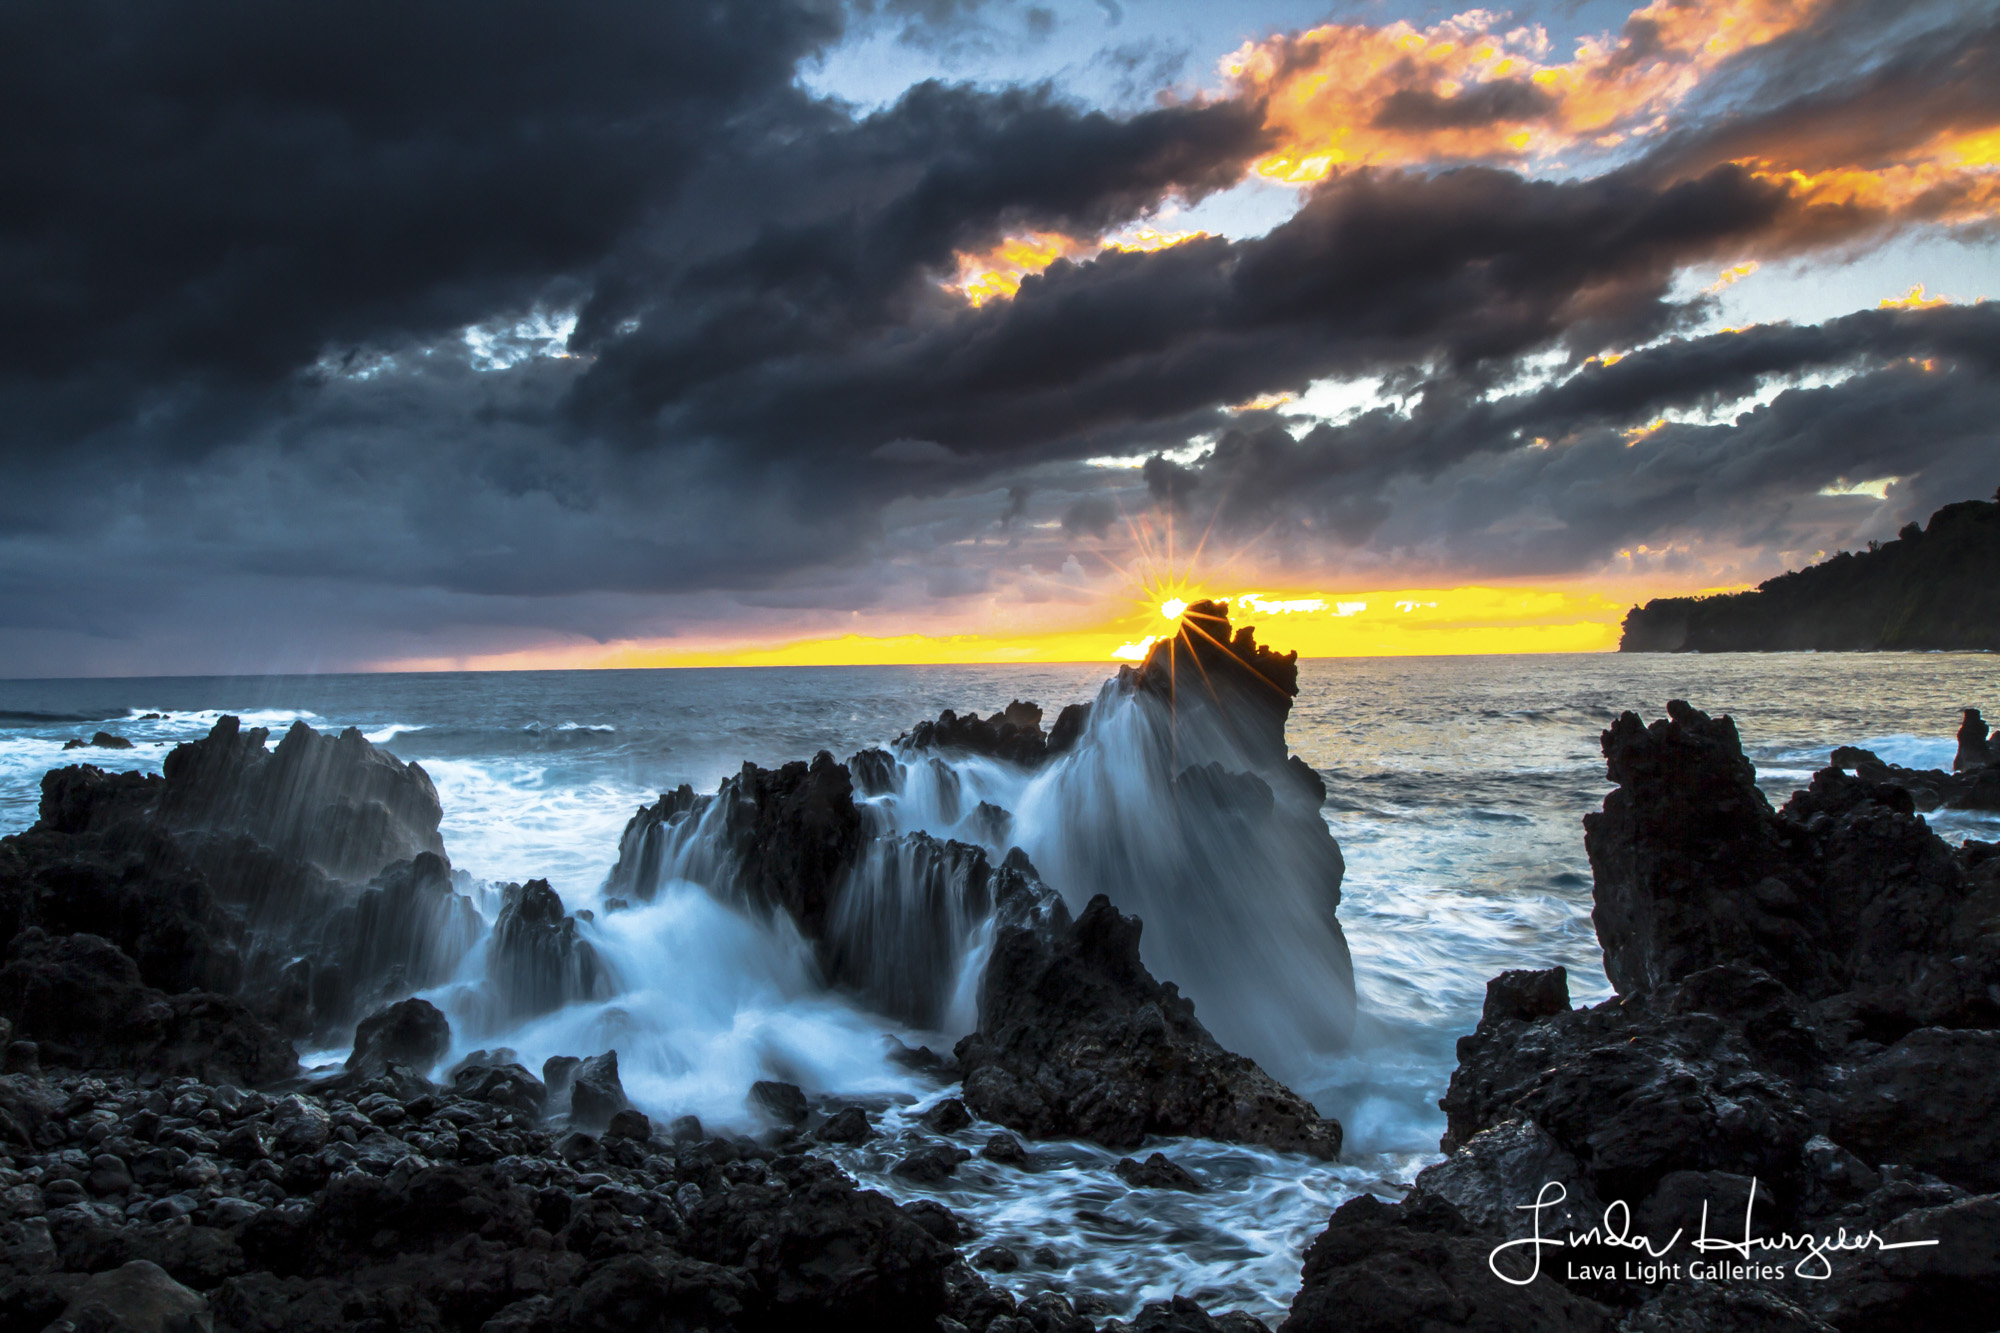 First image ever sold in the Waikoloa gallery.